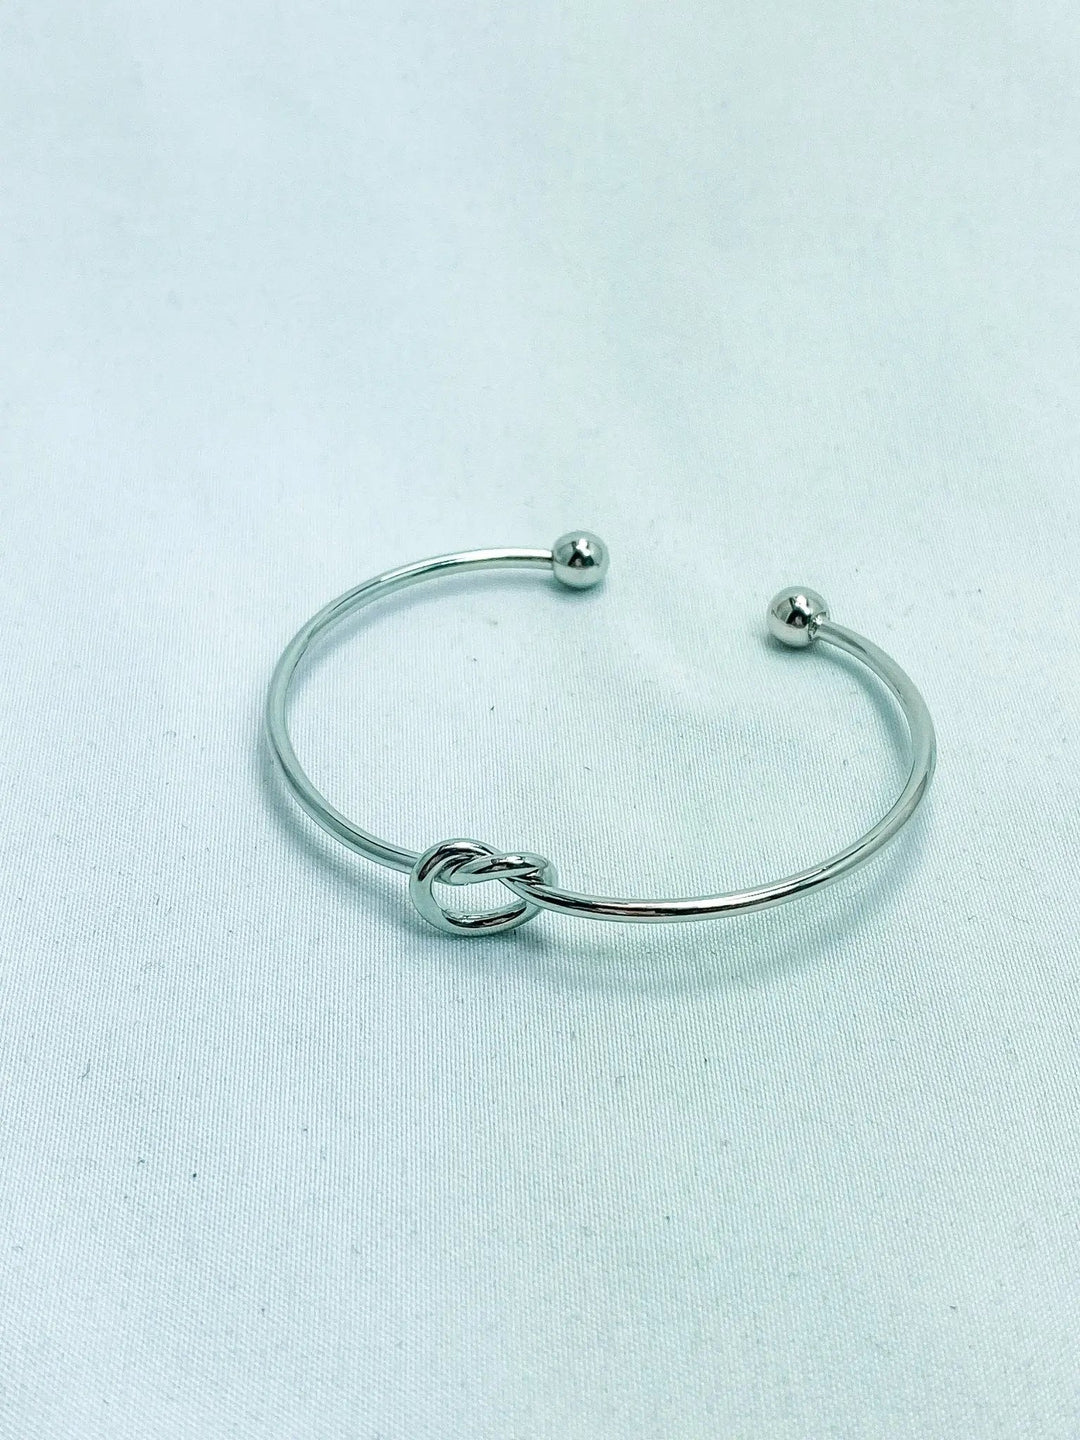 Silver Love Knot Thin Cuff Bracelet - Lucy Doo